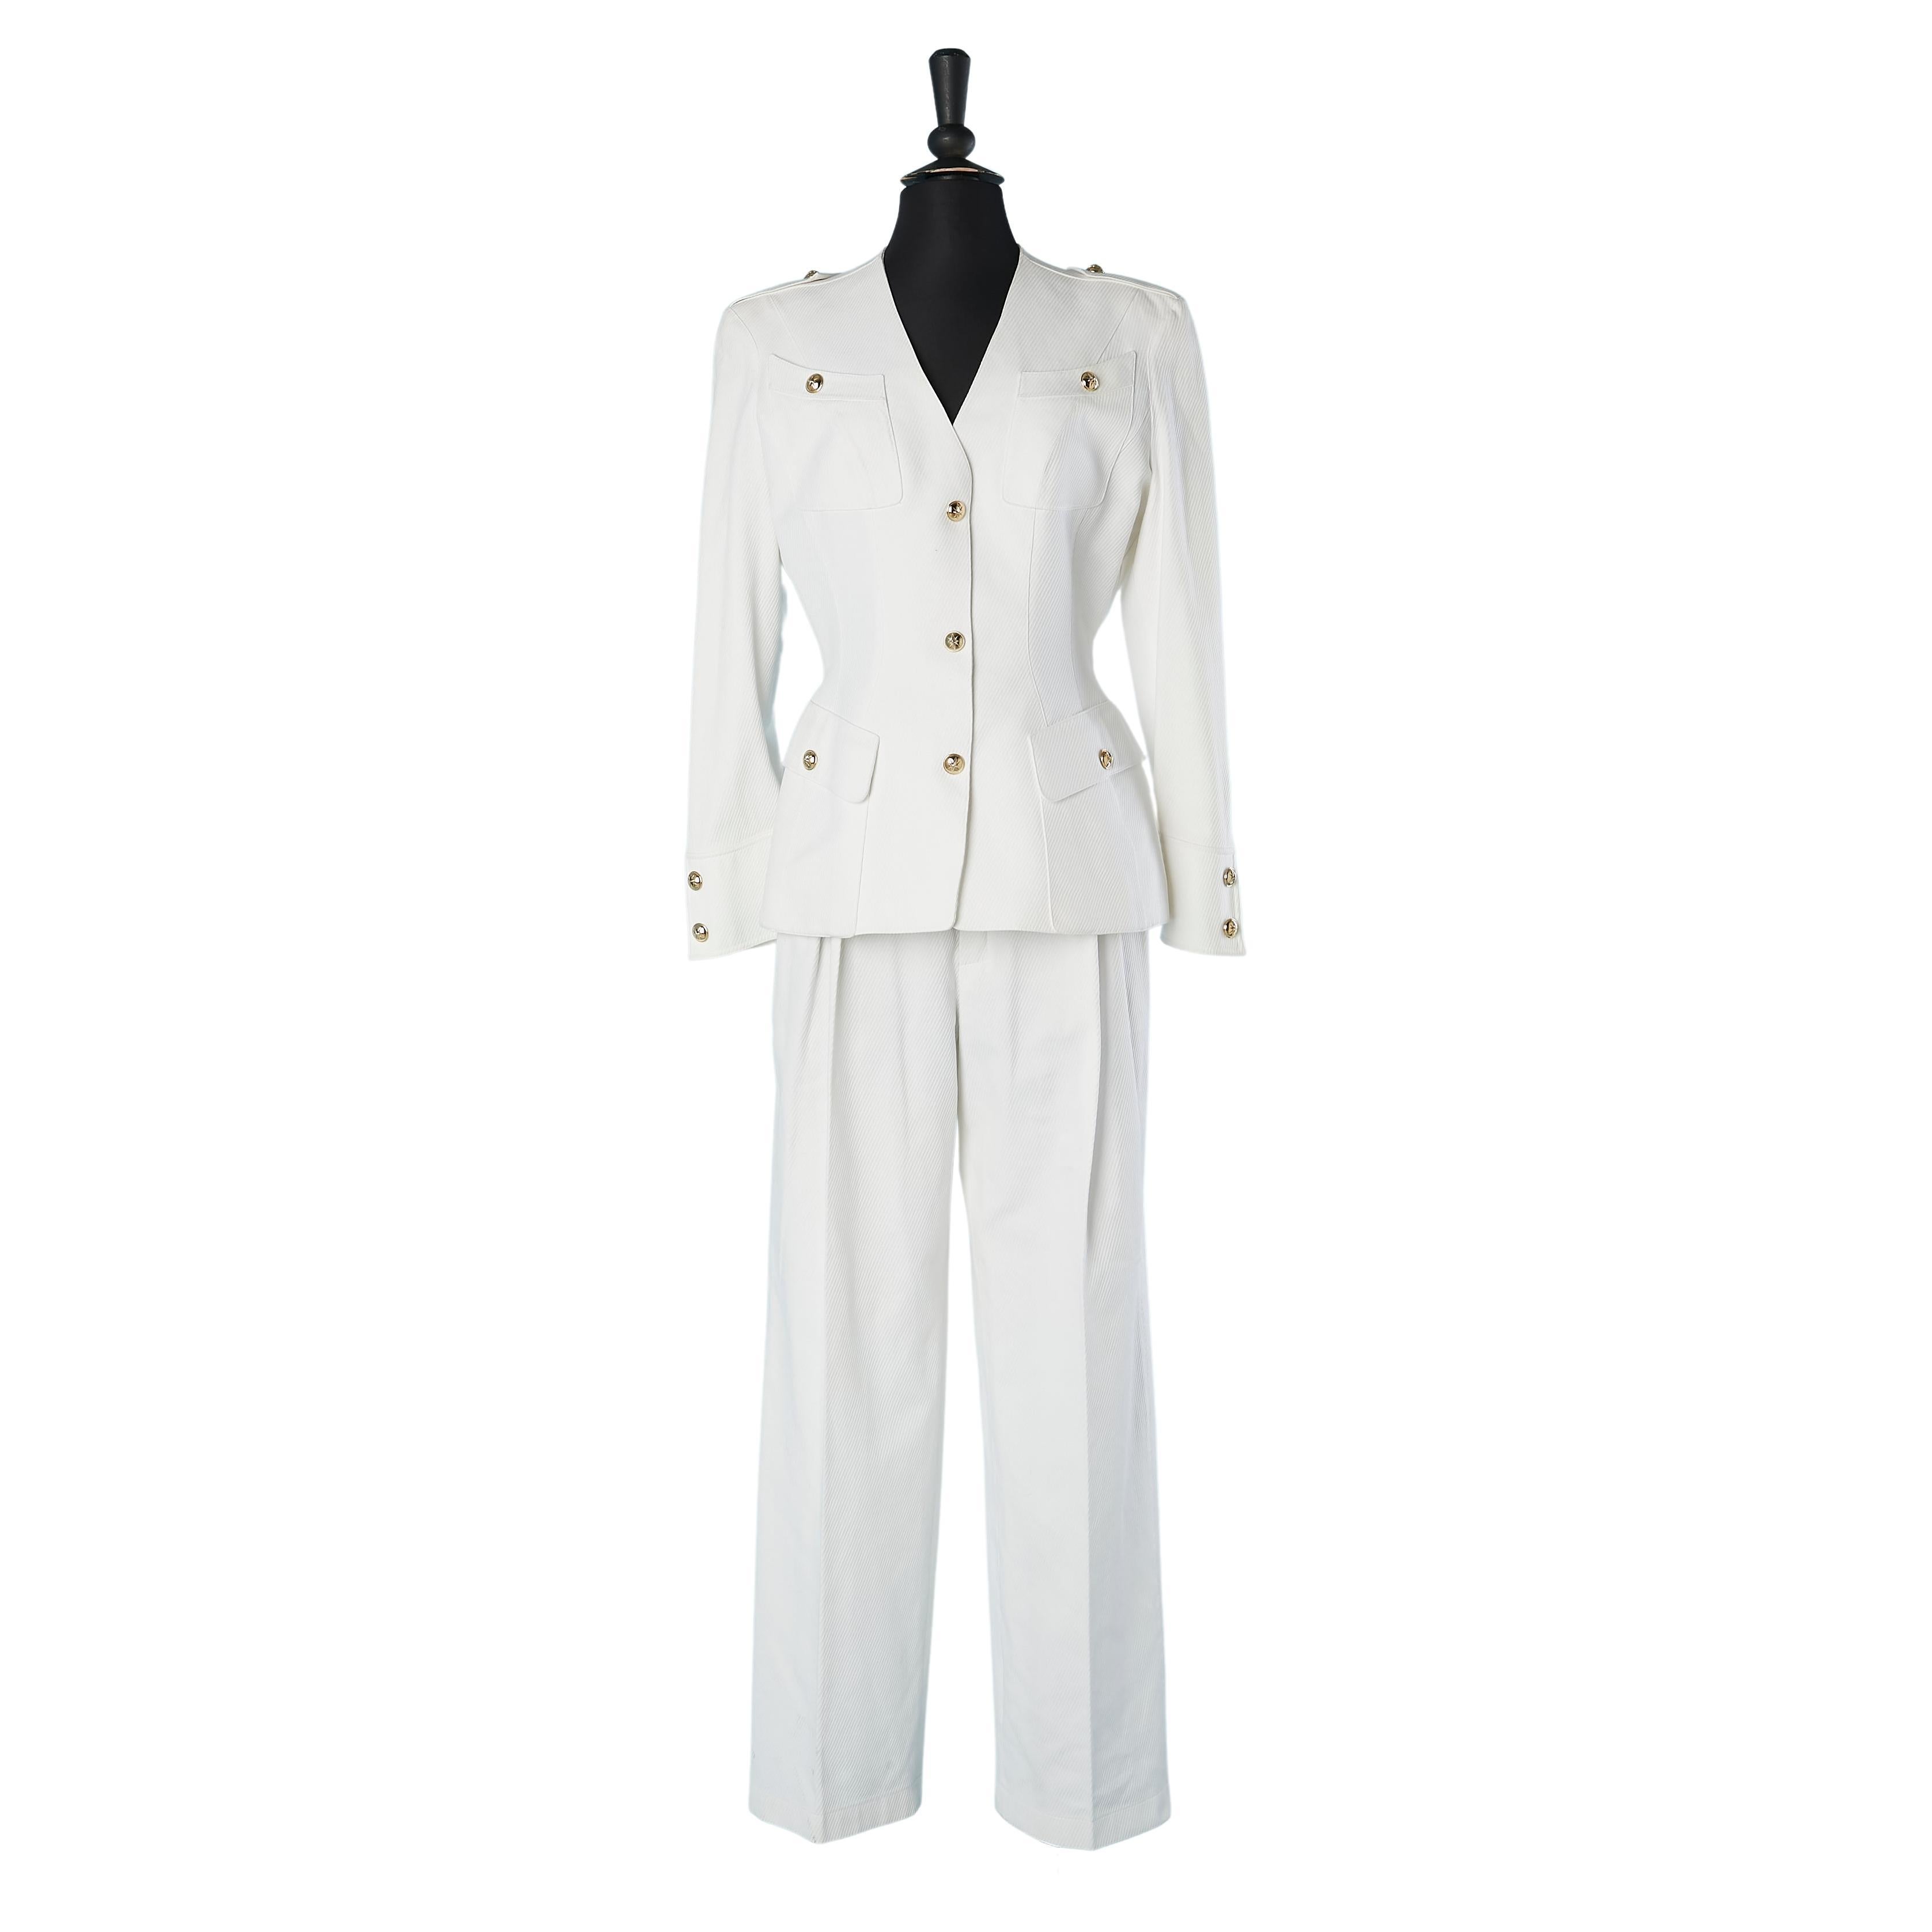 Backless white cotton trouser-suit with gold metal star snap Thierry Mugler 